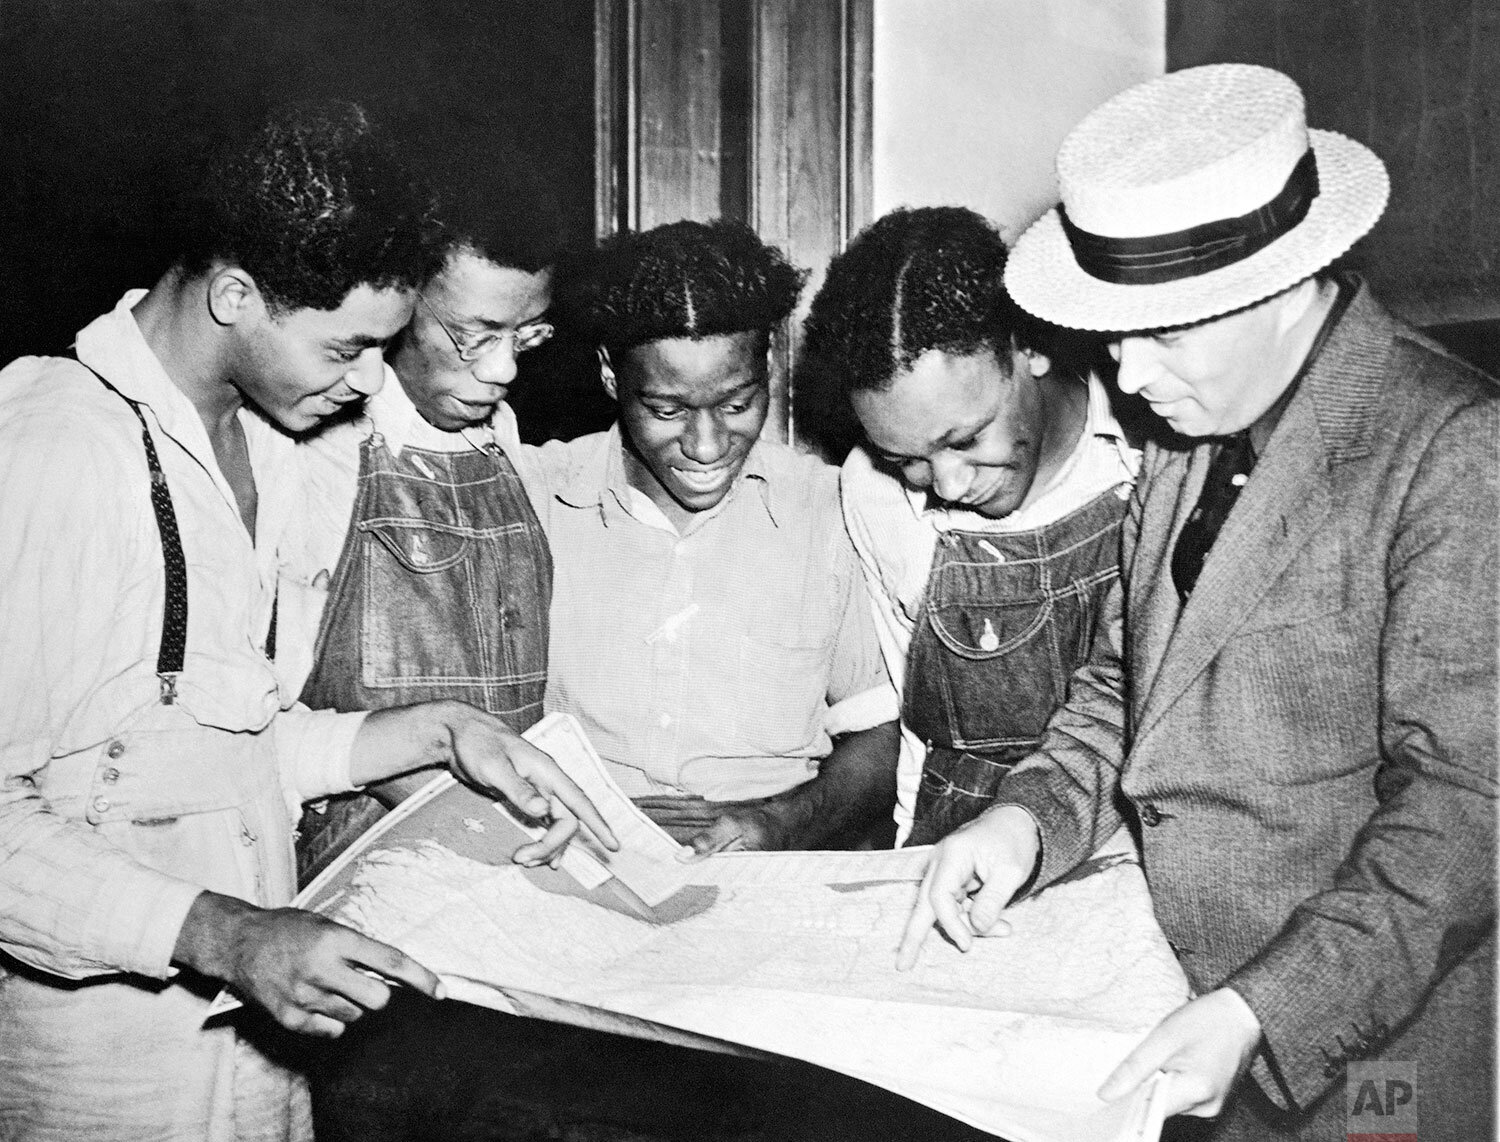  Attorney Samuel Leibowitz of New York, for the Scottsboro assault case defendants, is shown here as he consults with the four of his clients who were freed, during a stop in Nashville en route to New York, July 25,1937. The four are Eugene Williams,